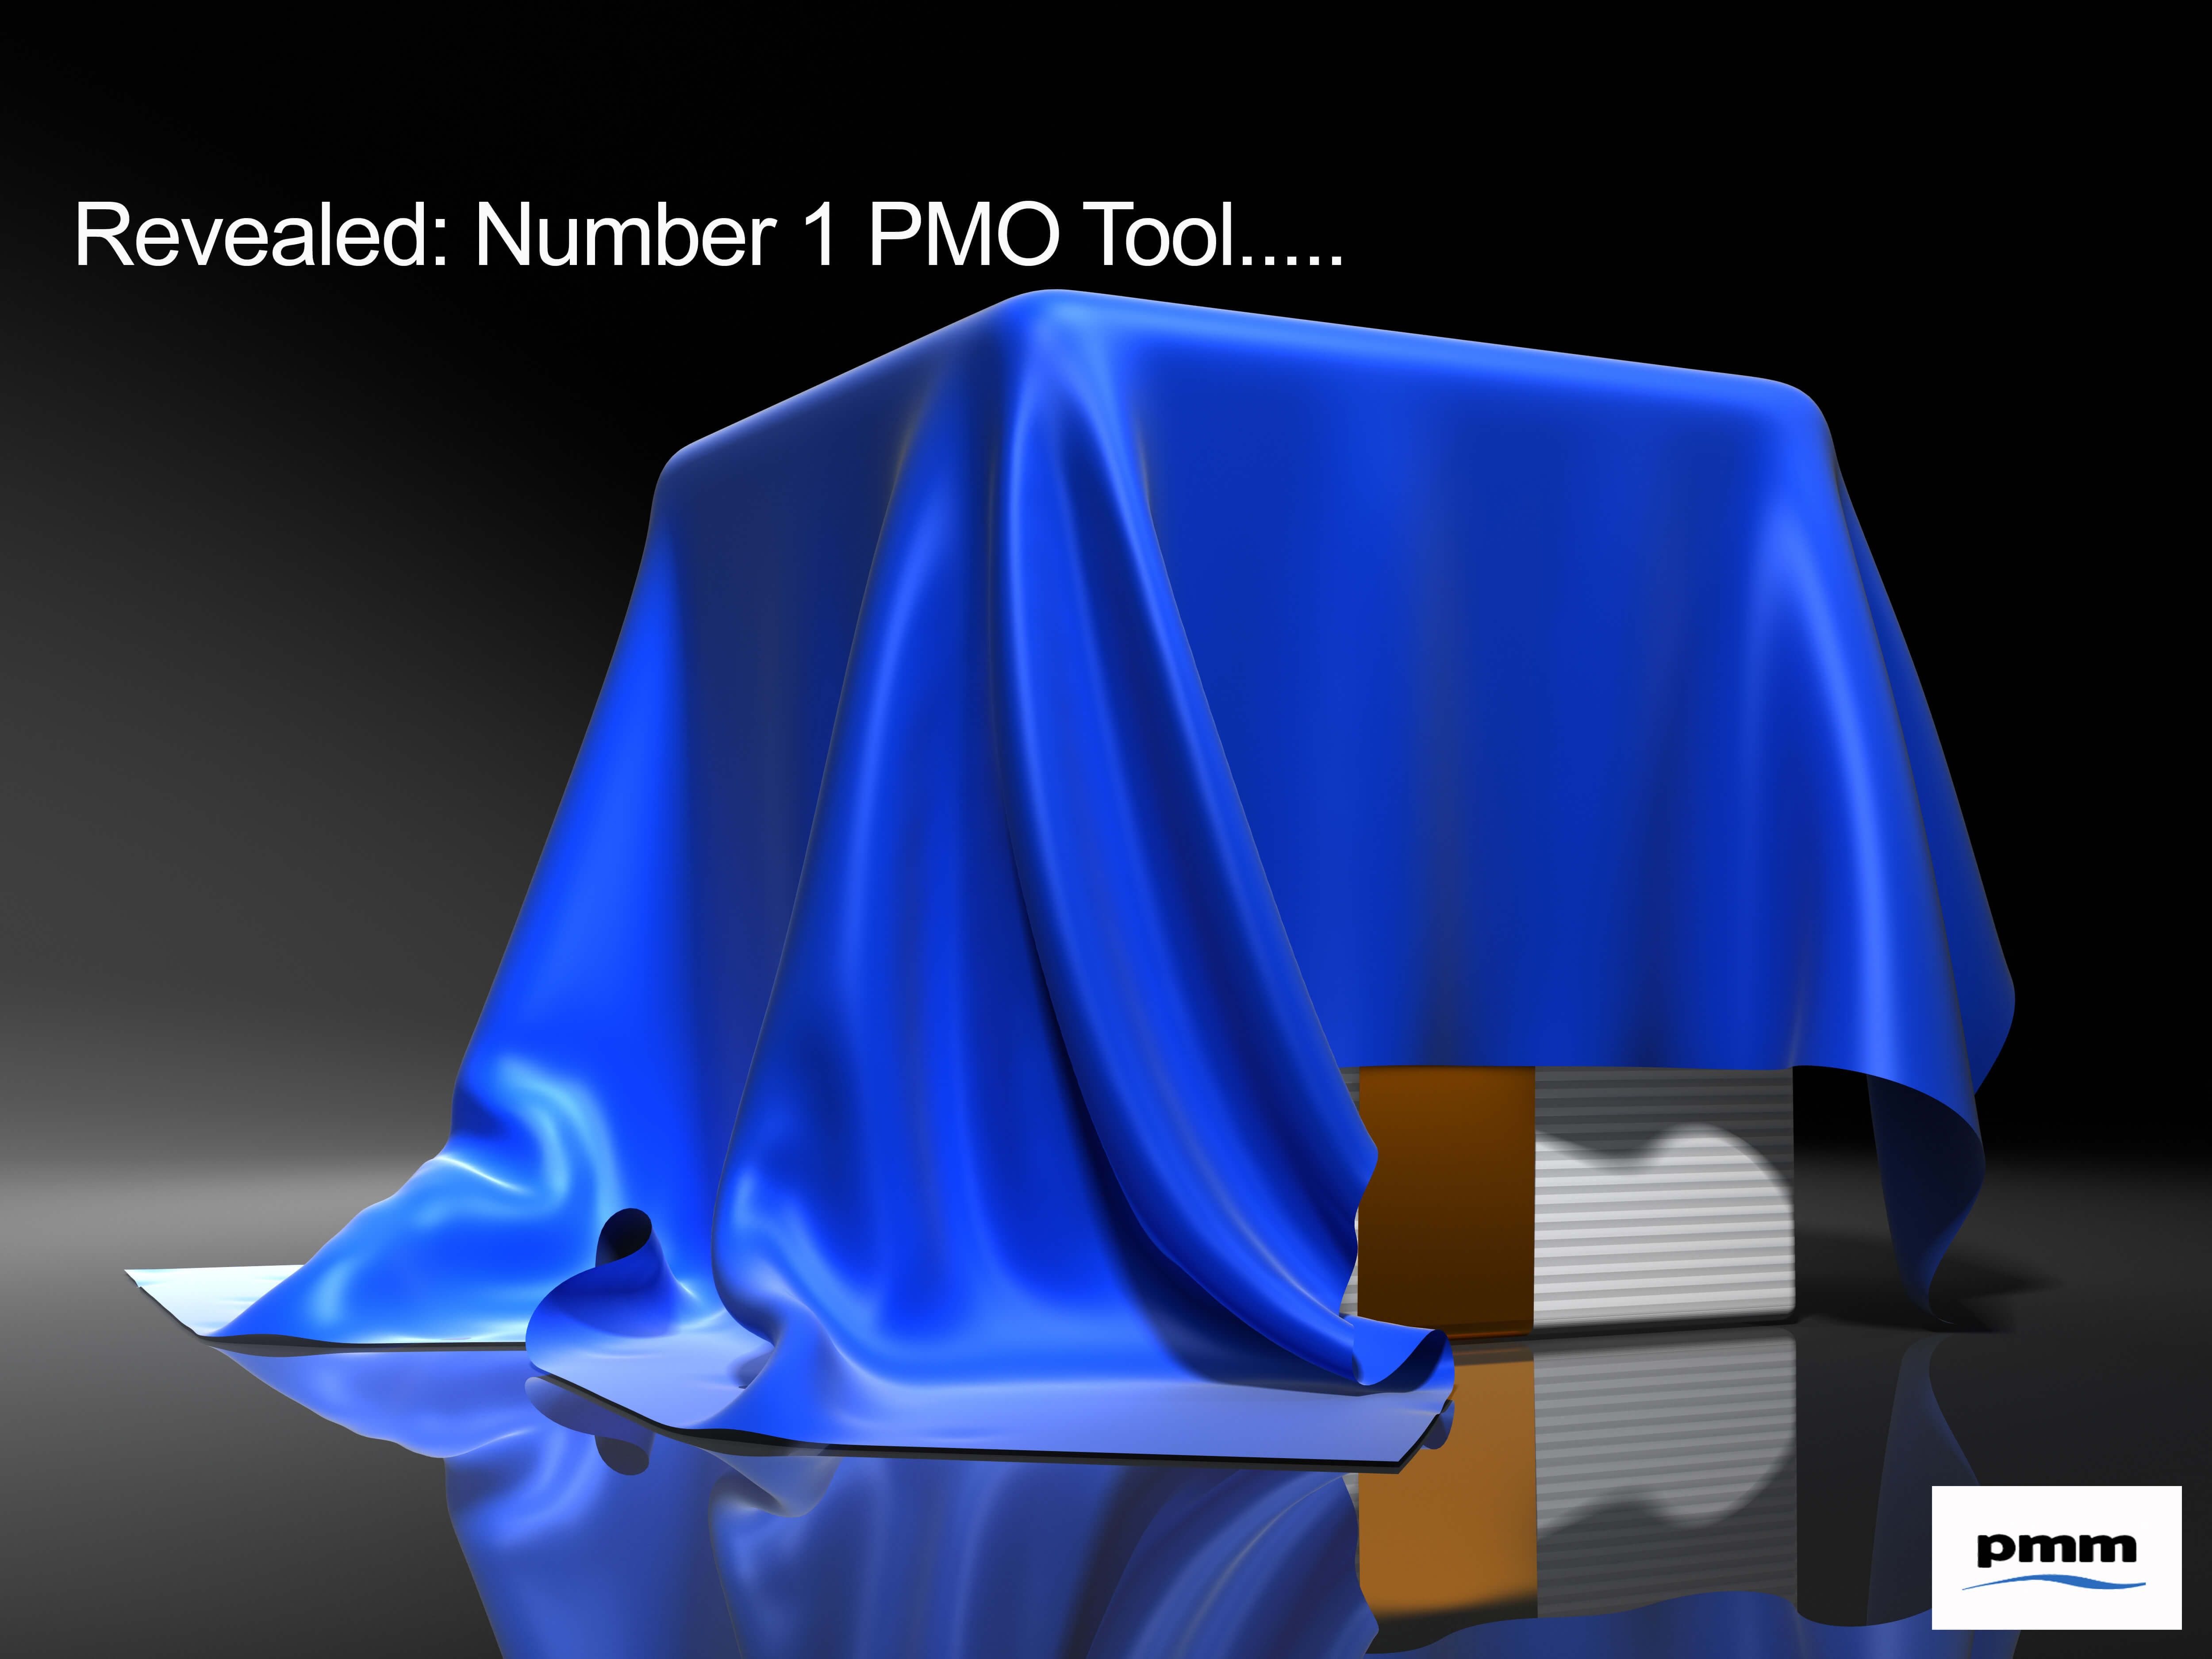 What is the “Number 1” PMO tool?